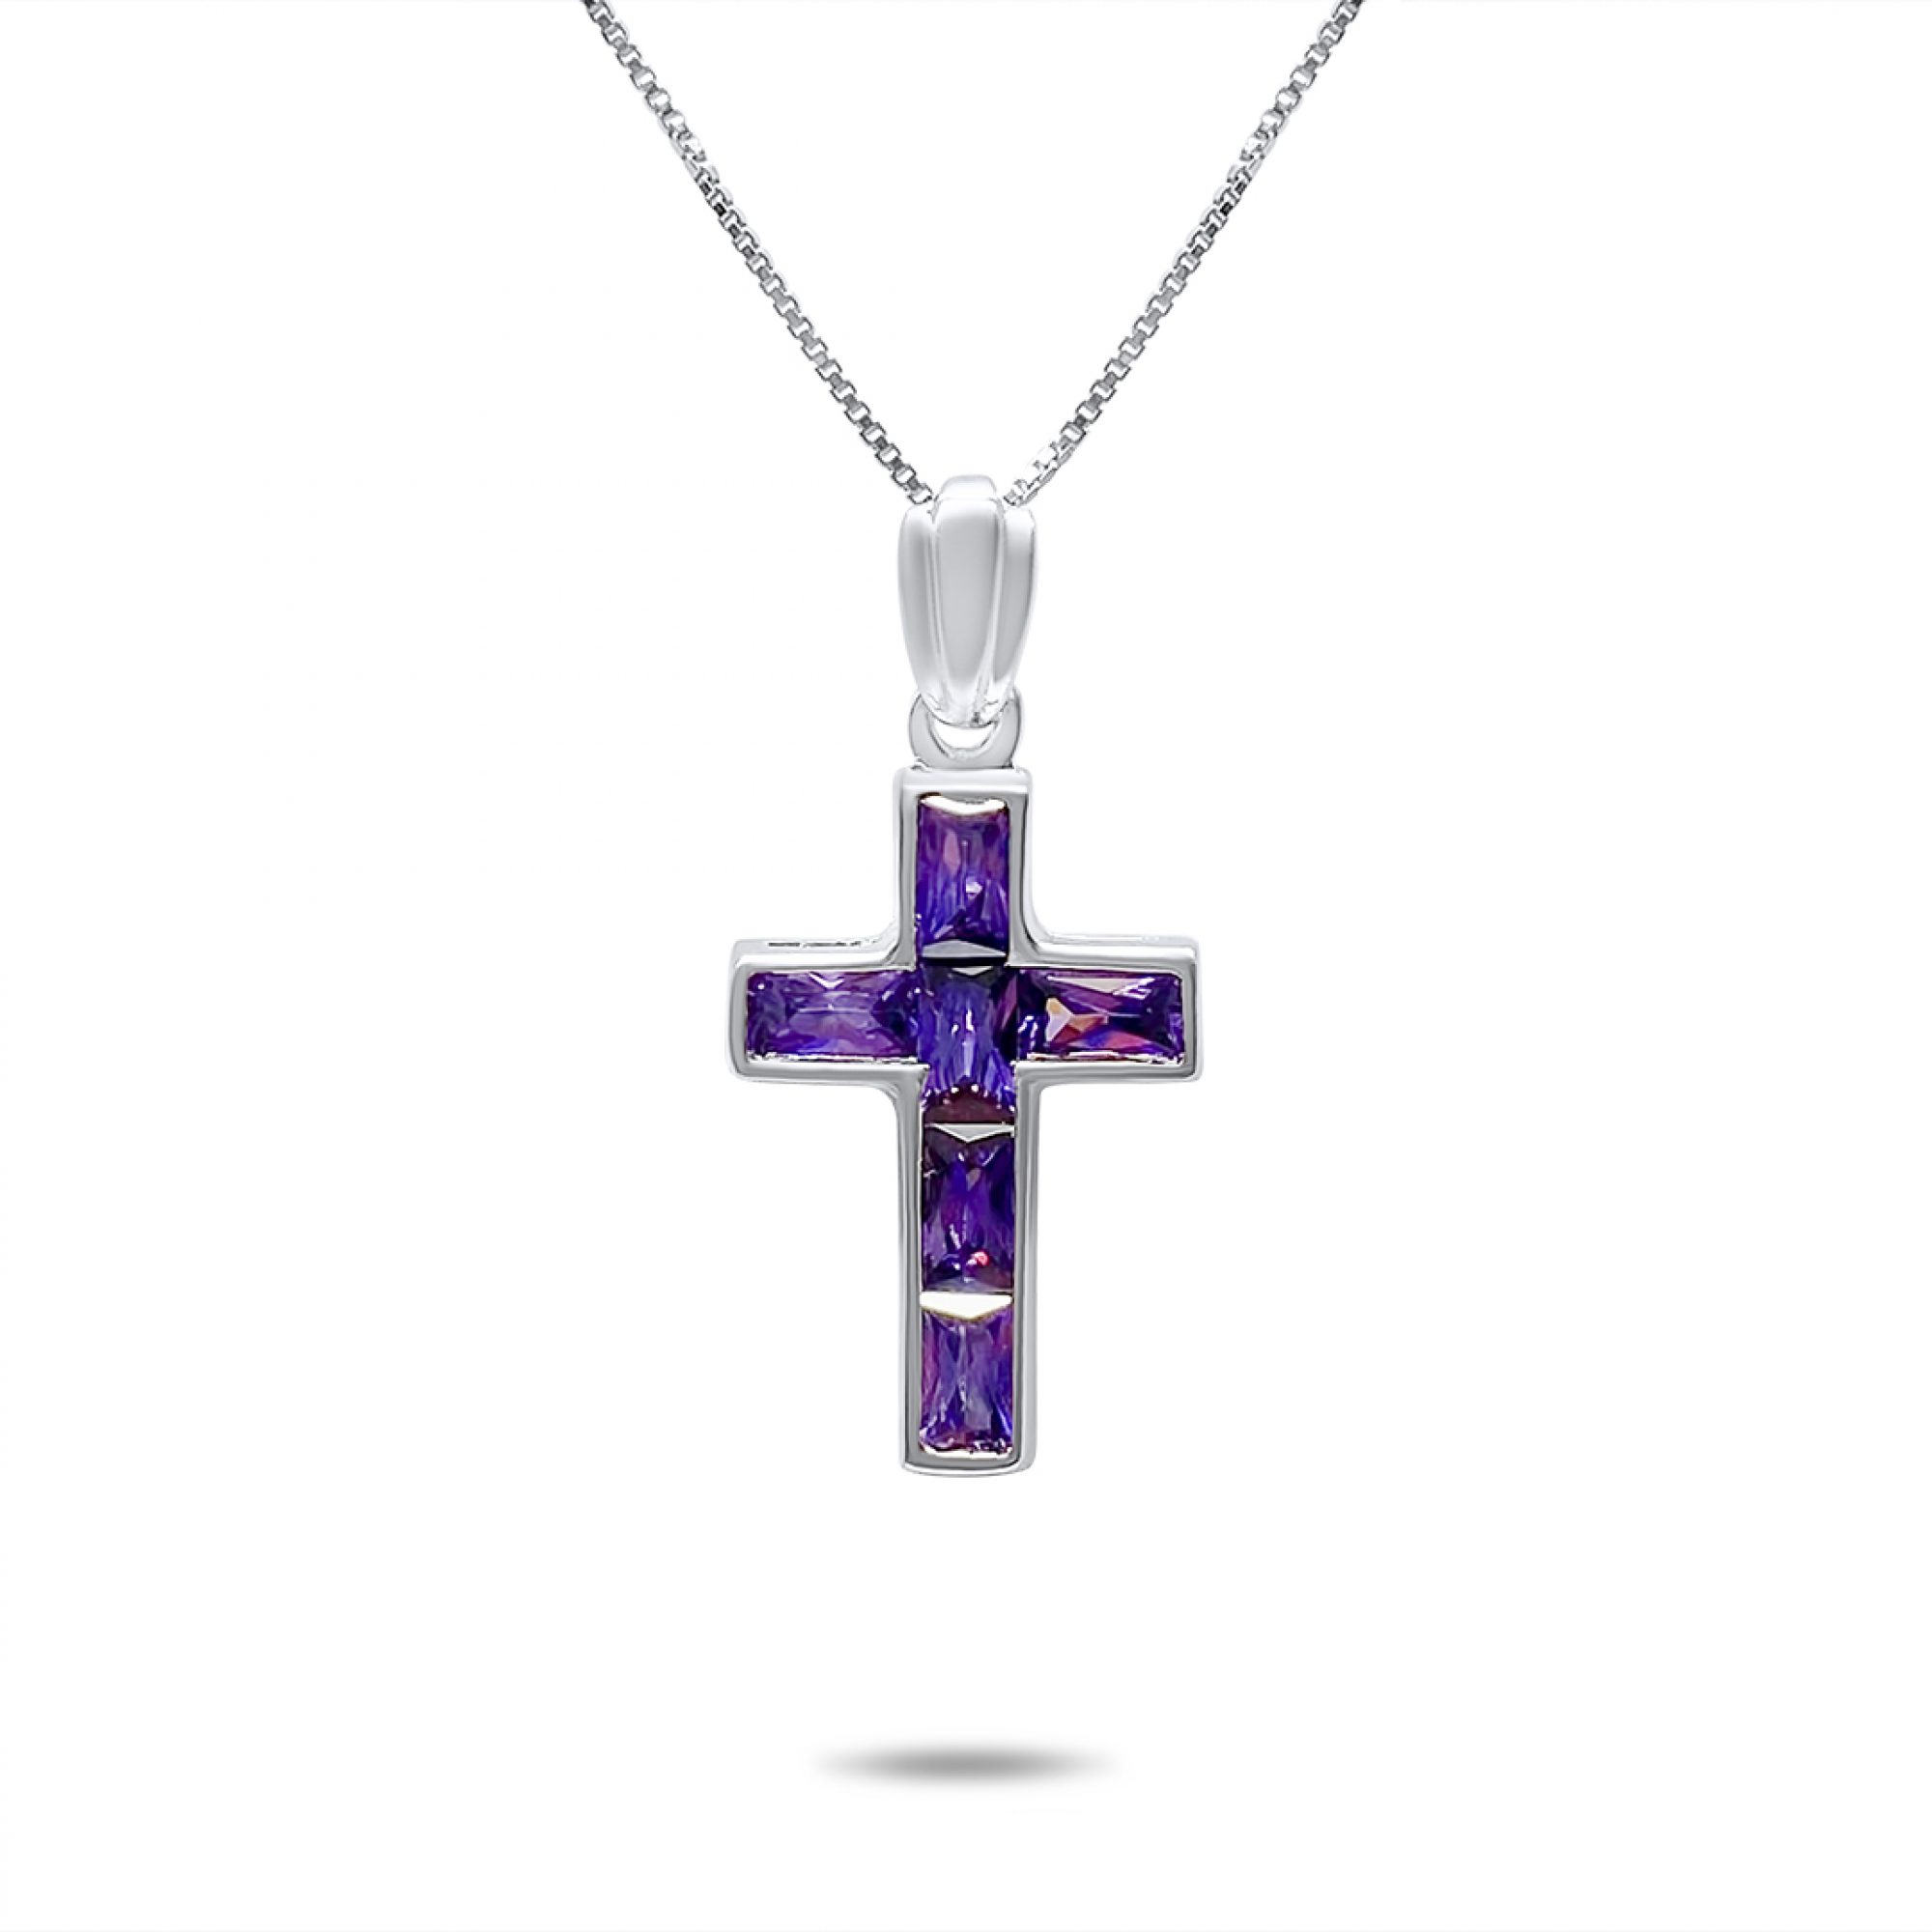 Cross necklace with amethyst stones